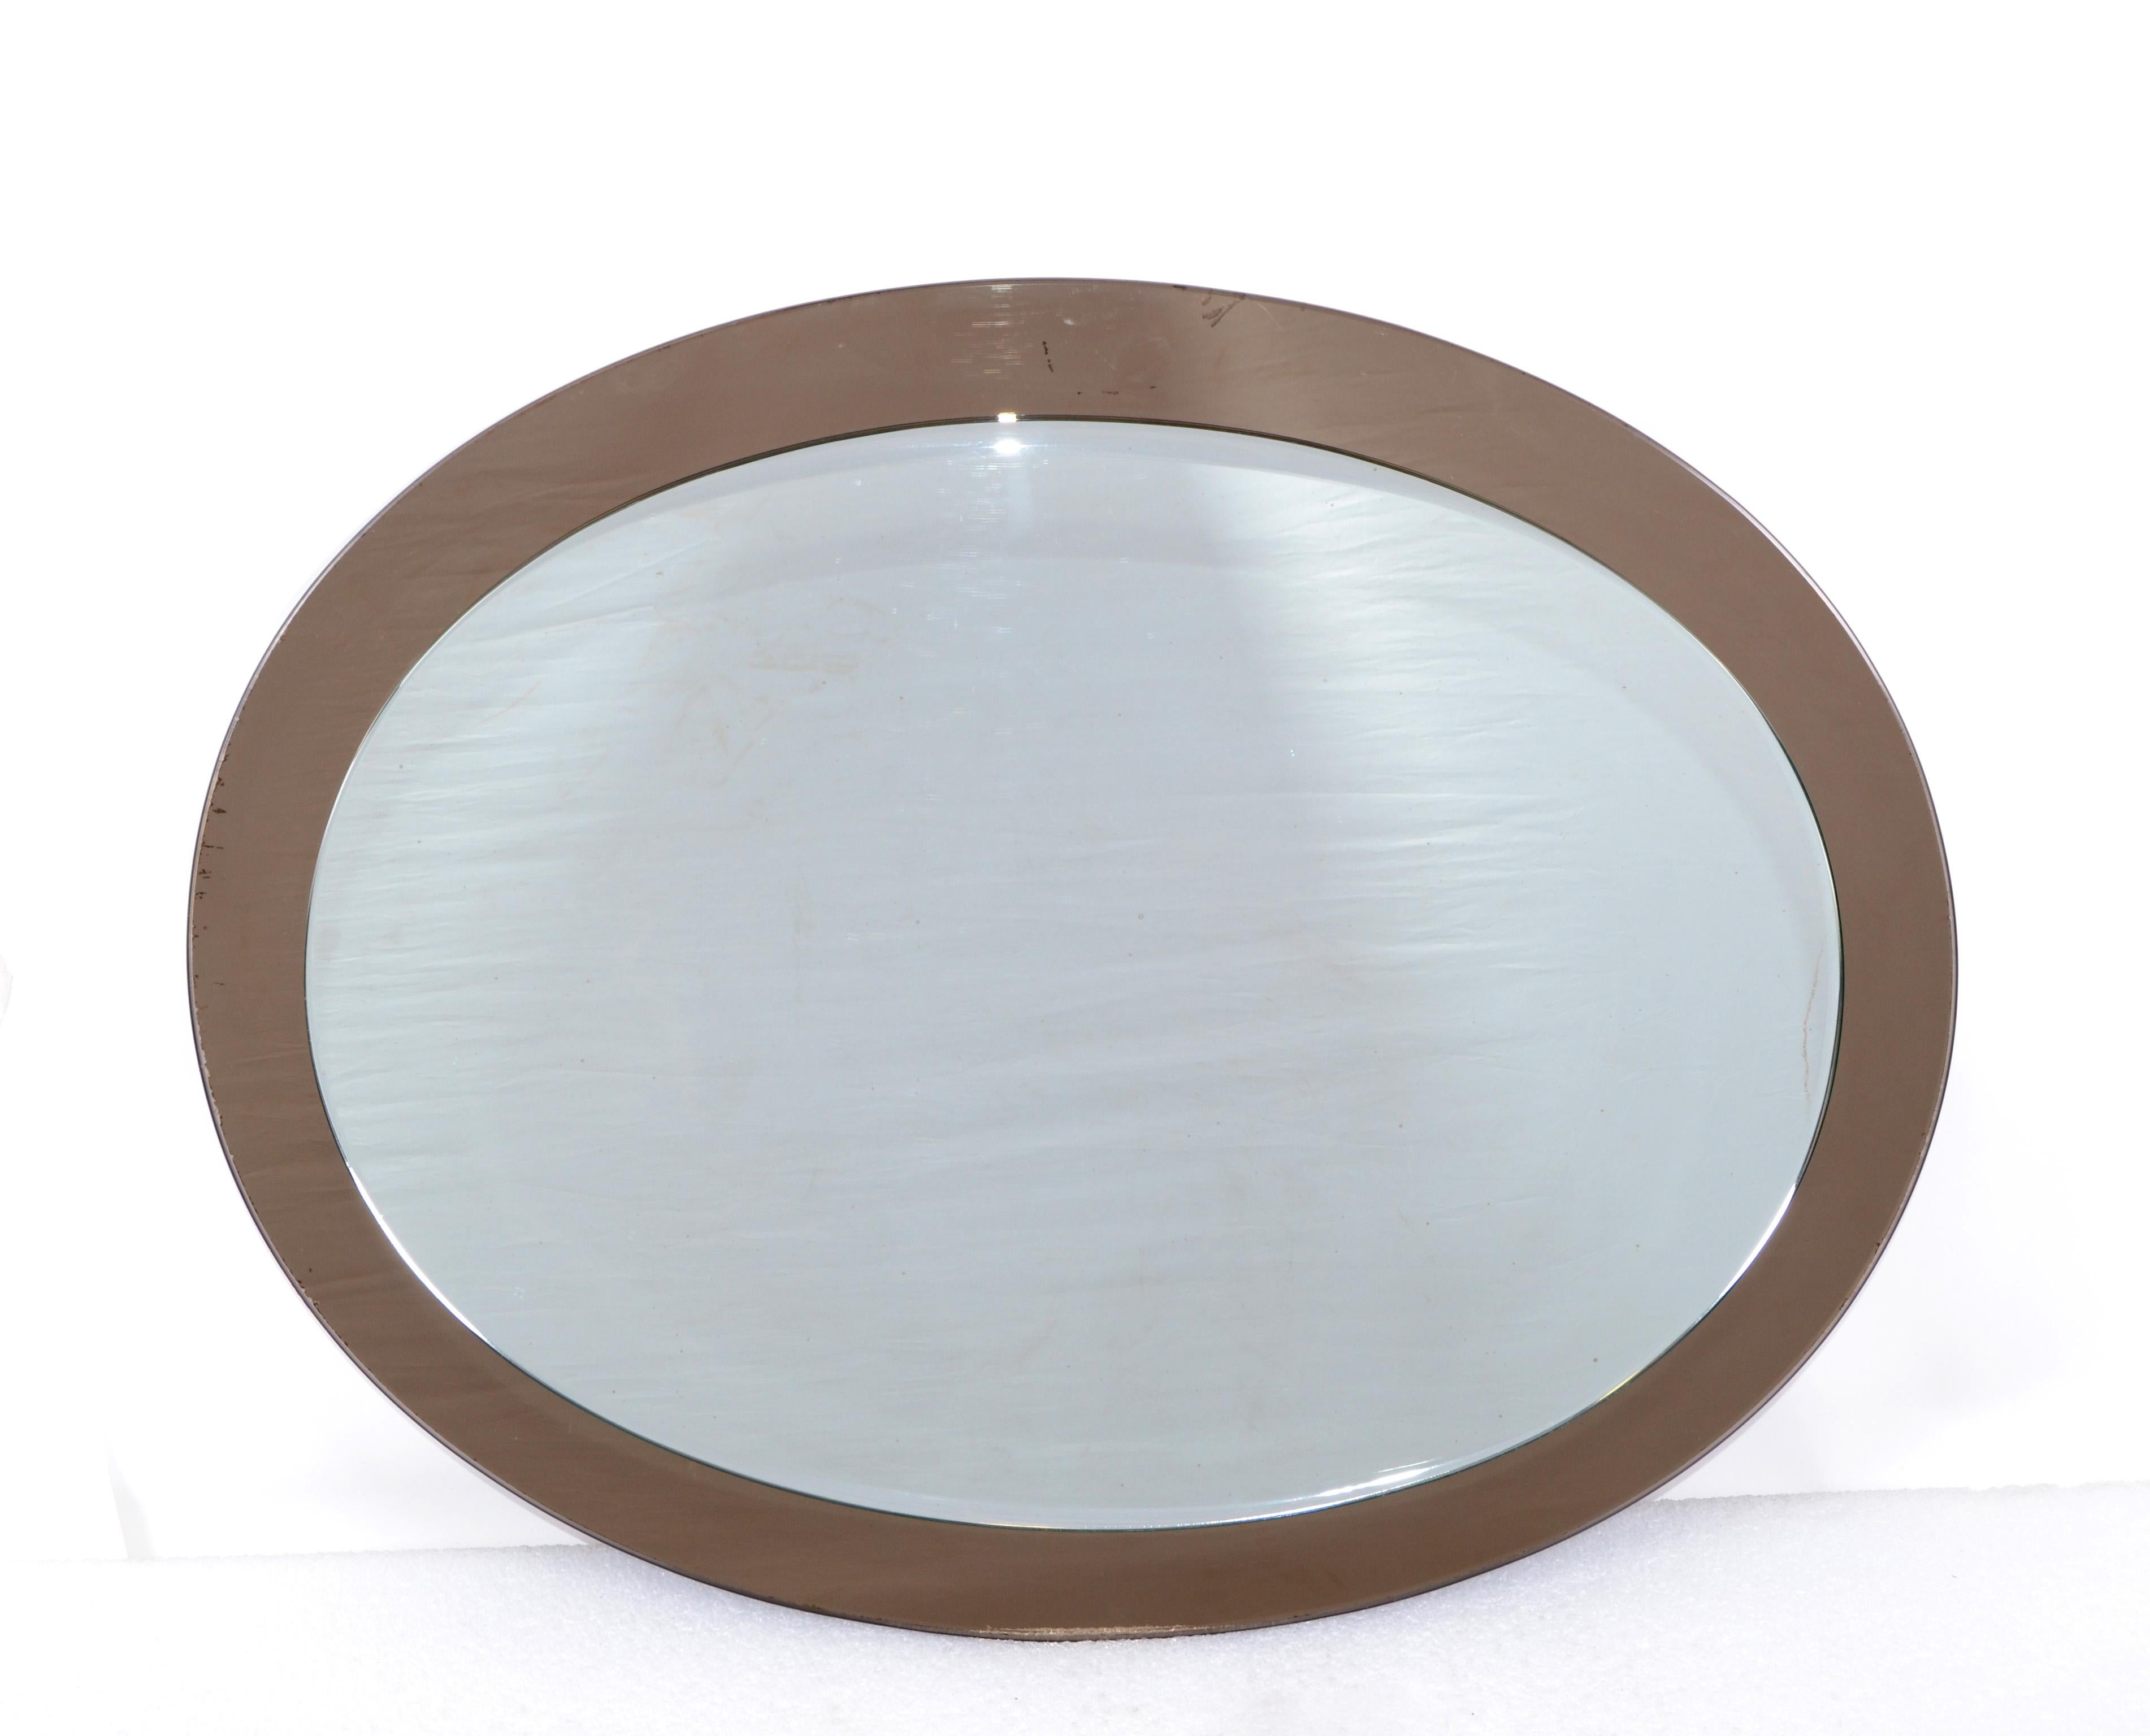 Mid-Century Modern oval beveled Italian wall mirror by Veca circa 1960s.
The back is smoke brown mirror with a regular clear mirror on the top (23 H x 17 inches Width).
Can be hung horizontal or vertical.